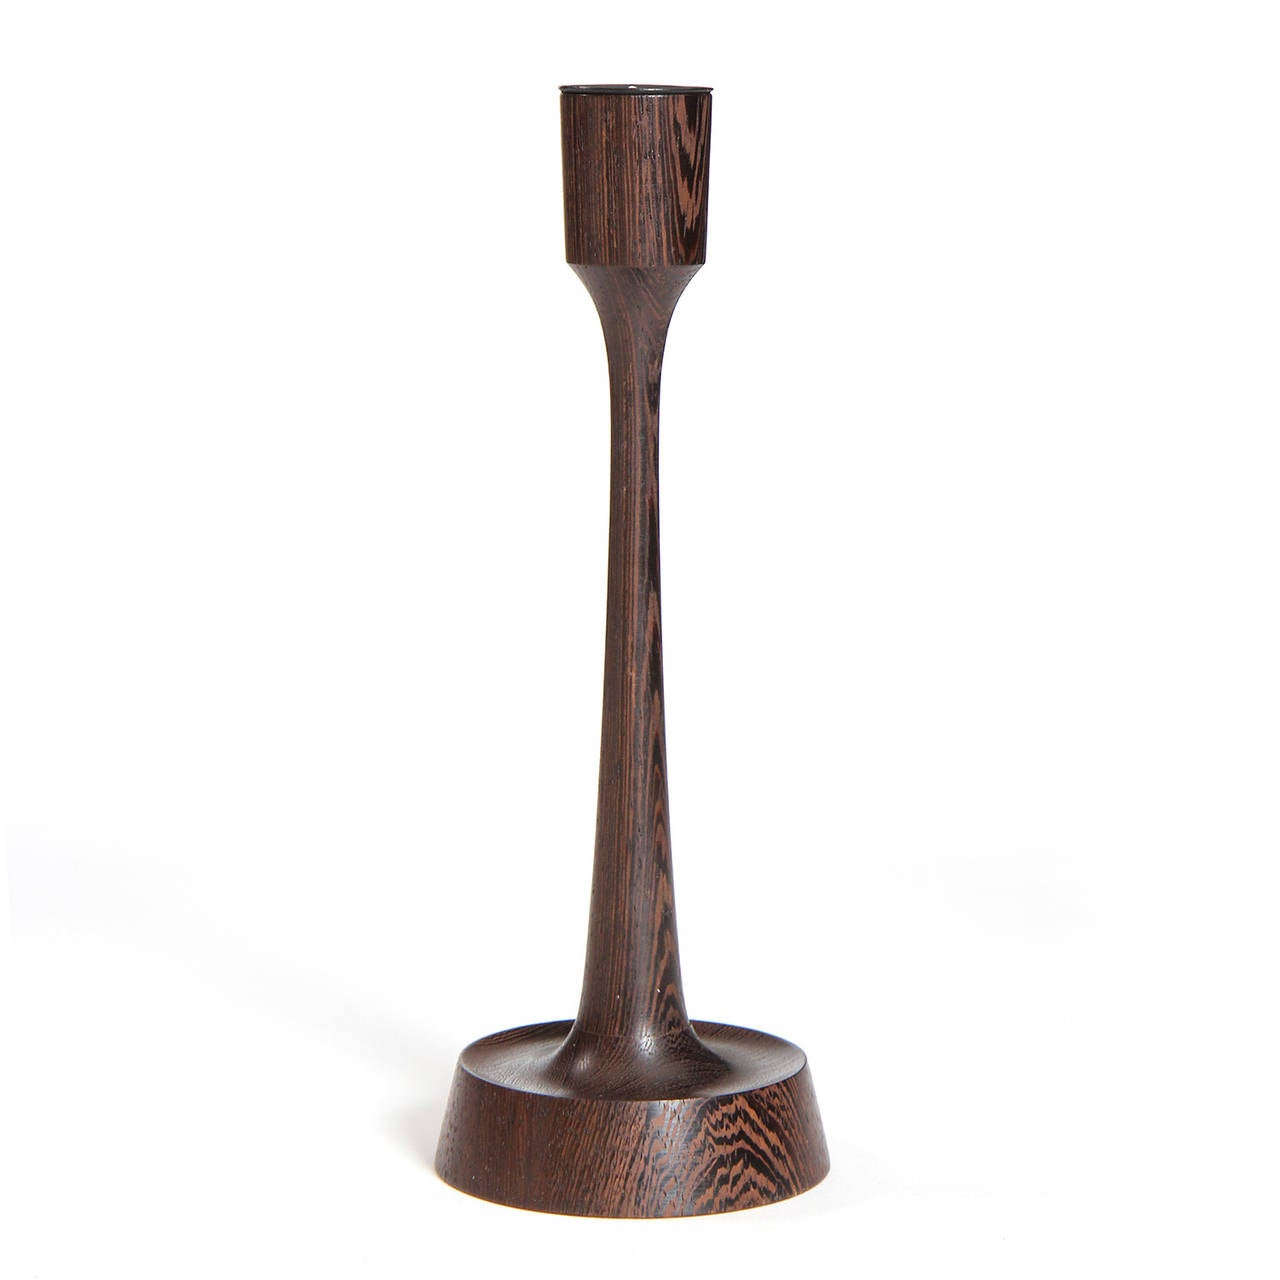 A sculptural and finely turned candle holder made of richly grained wenge.